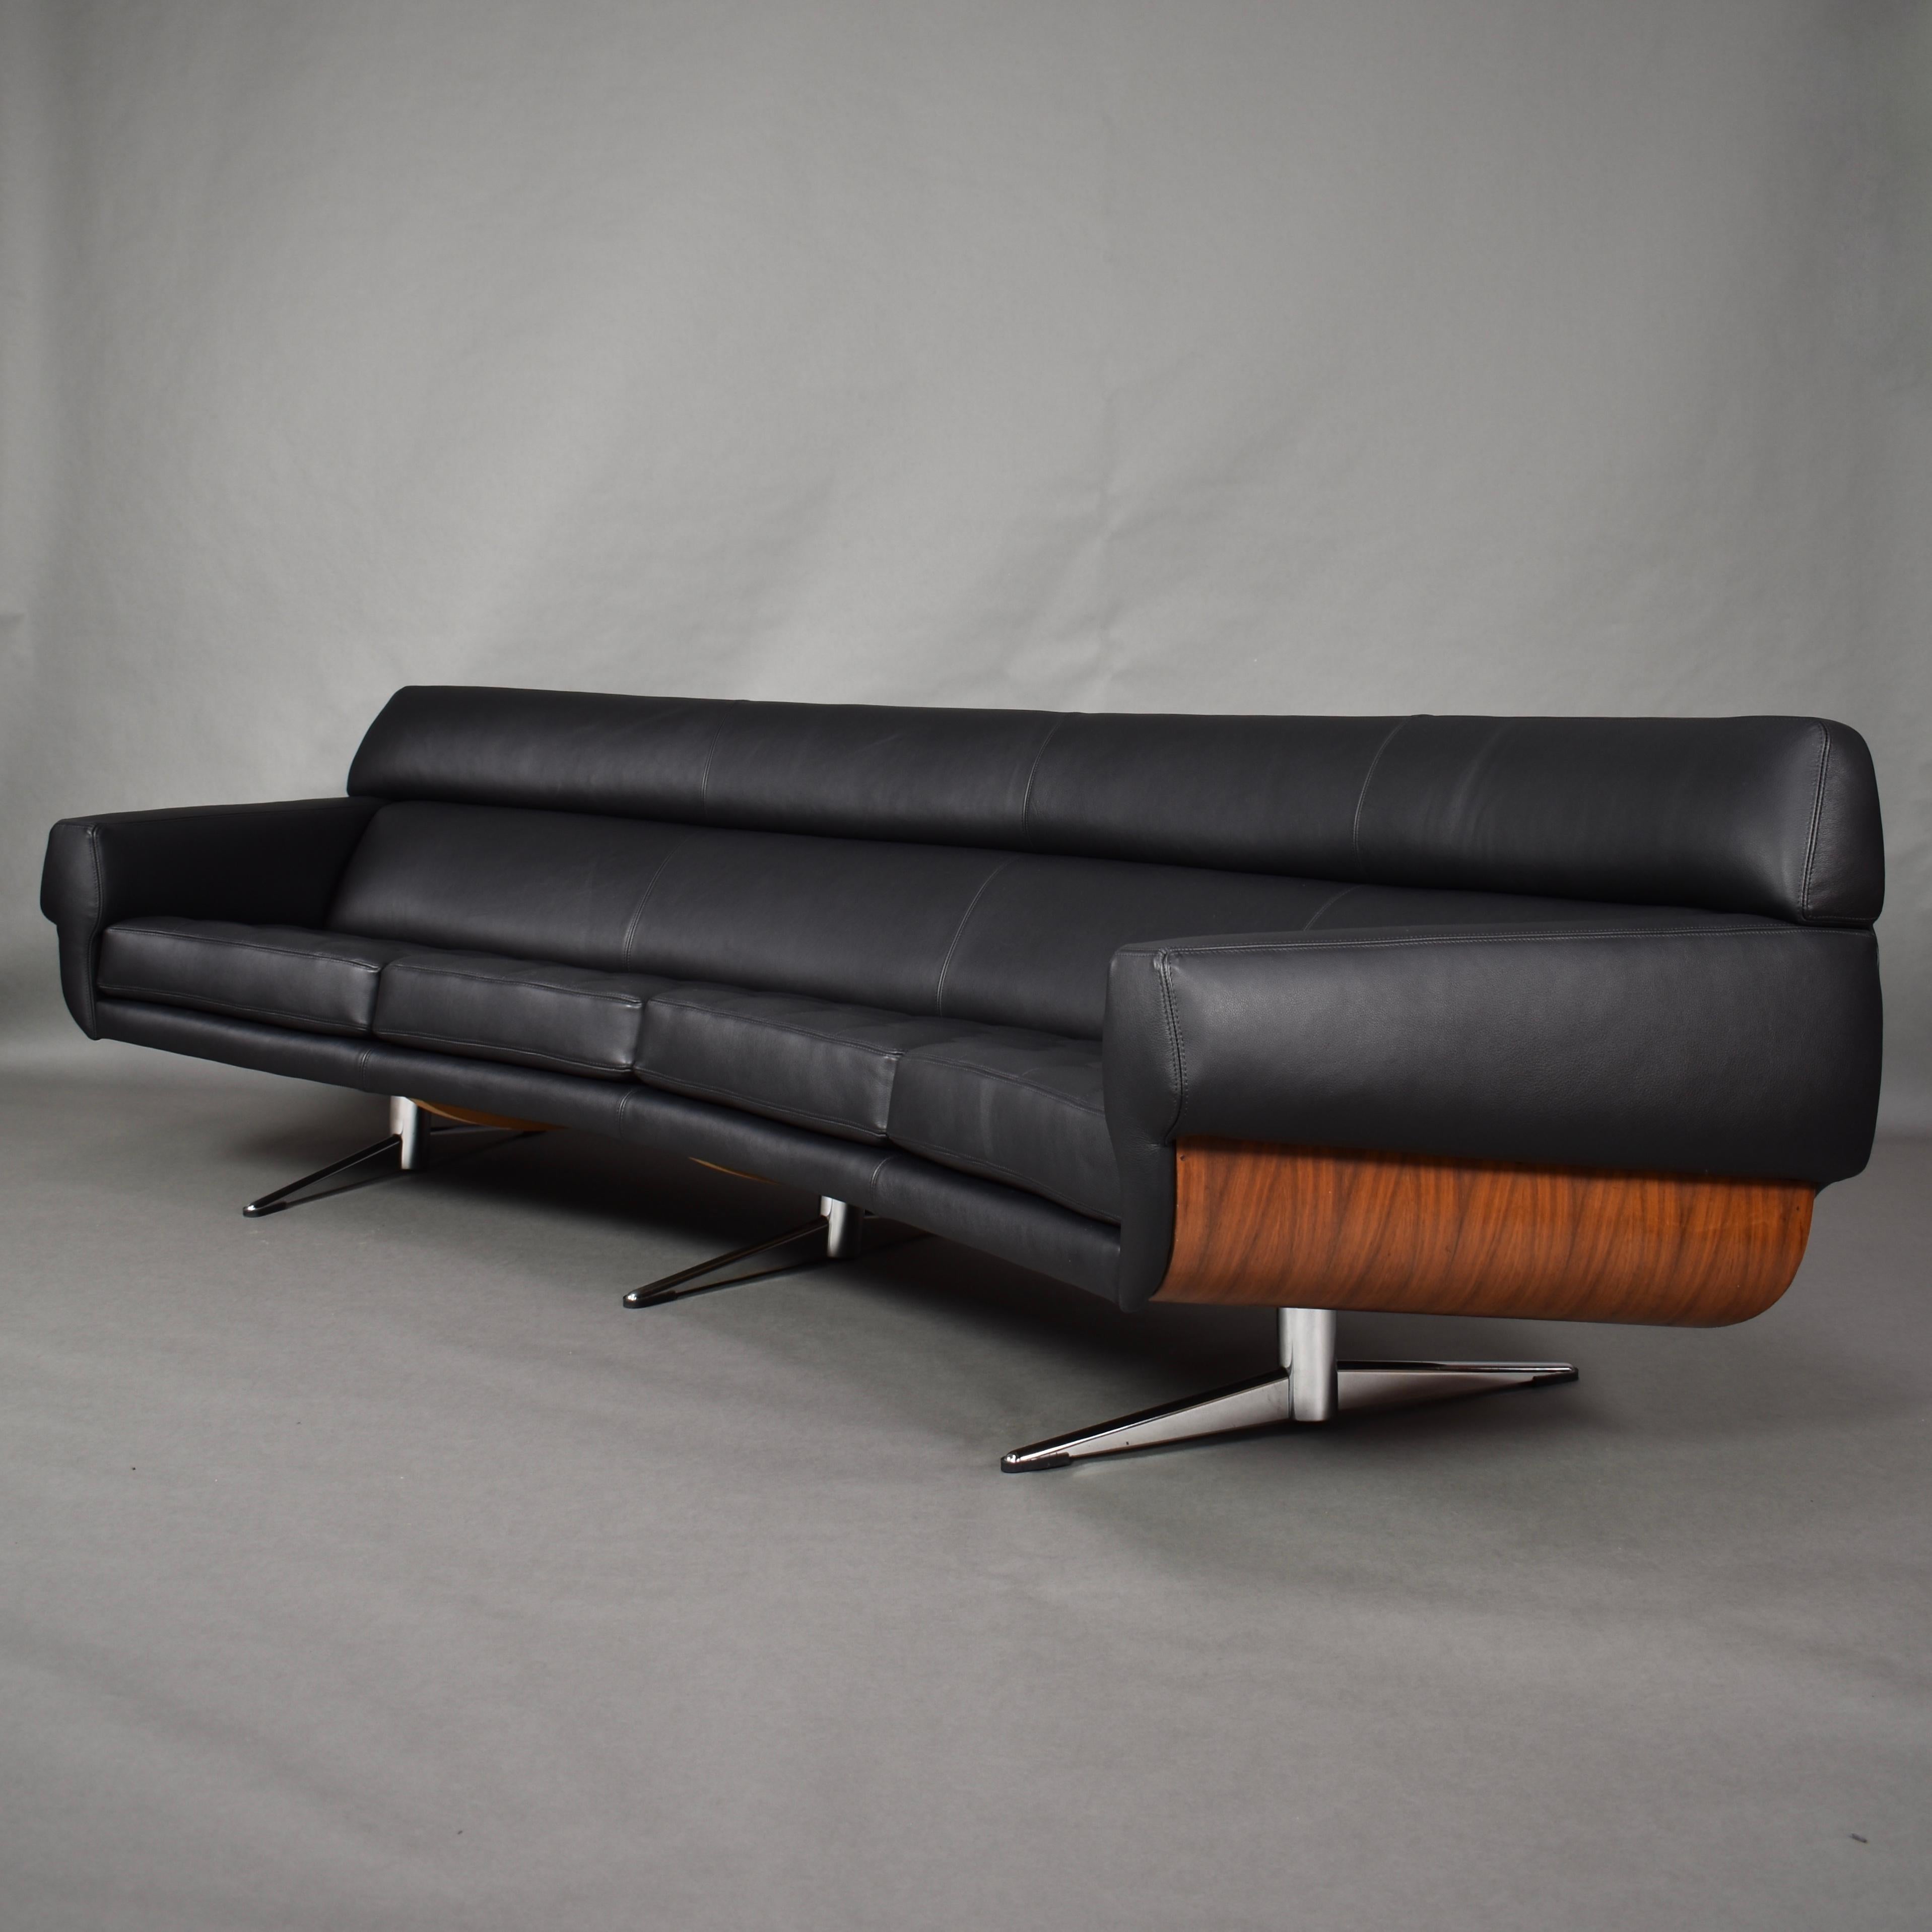 Extraordinary curved sofa by Martin Stoll, Germany, circa 1960.

This is a very rare sofa and a real showpiece!!
The sides feature beautiful Brazilian Rosewood (Rio Palissander) bent plywood in the manor of Charles and Ray Eames' lounge